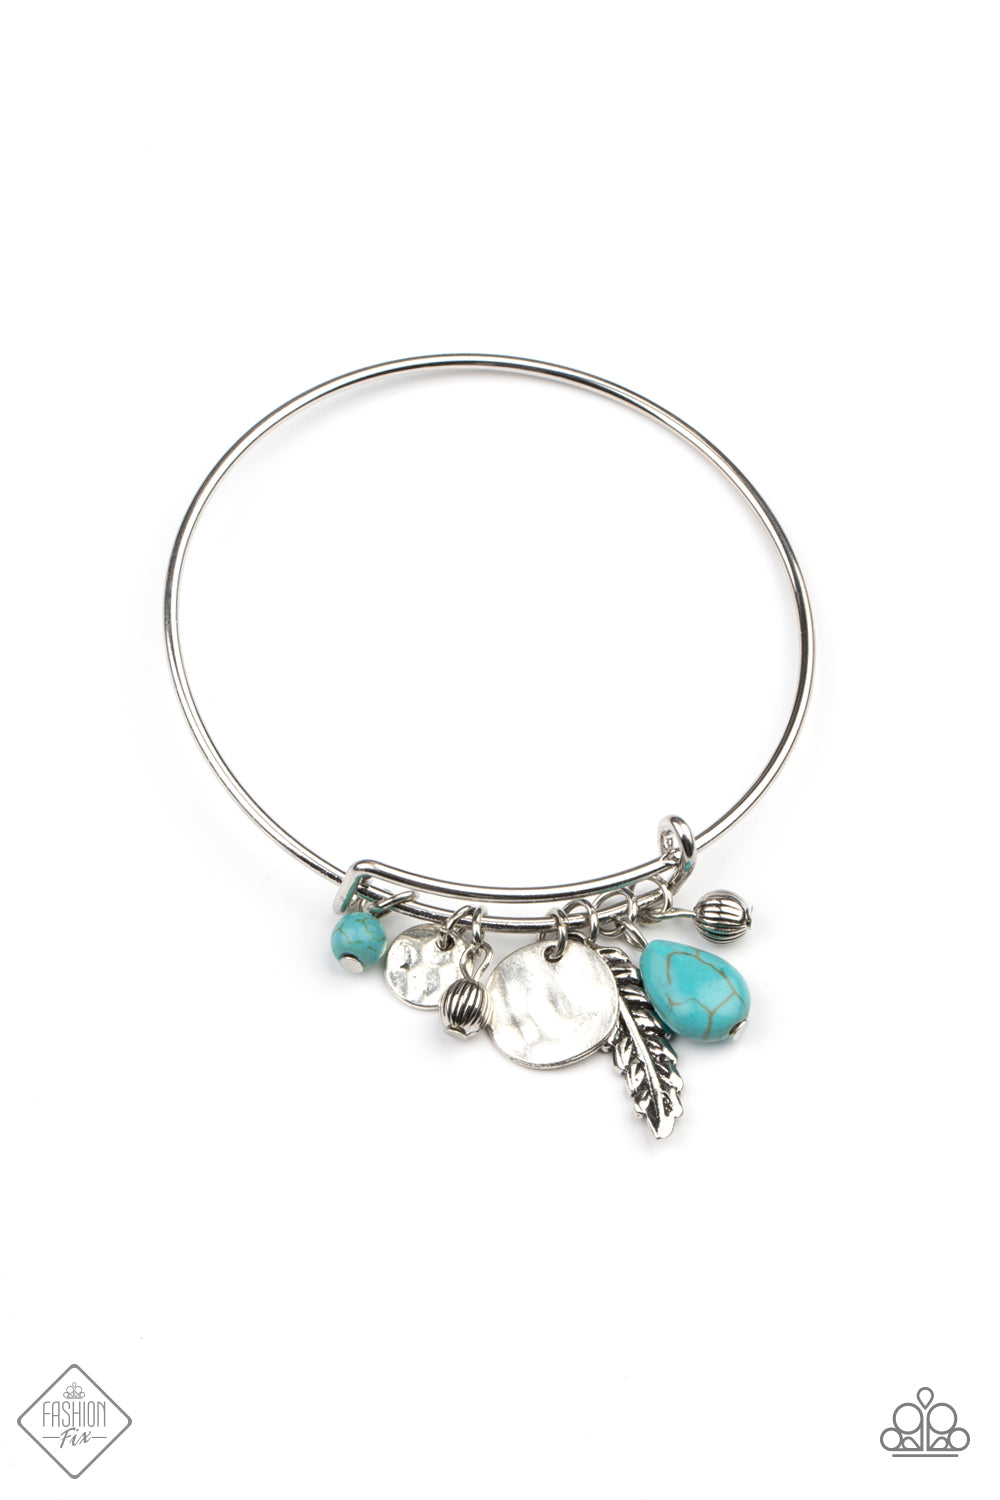 Paparazzi Root and RANCH Blue Bracelet-Fashion Fix-May 2021